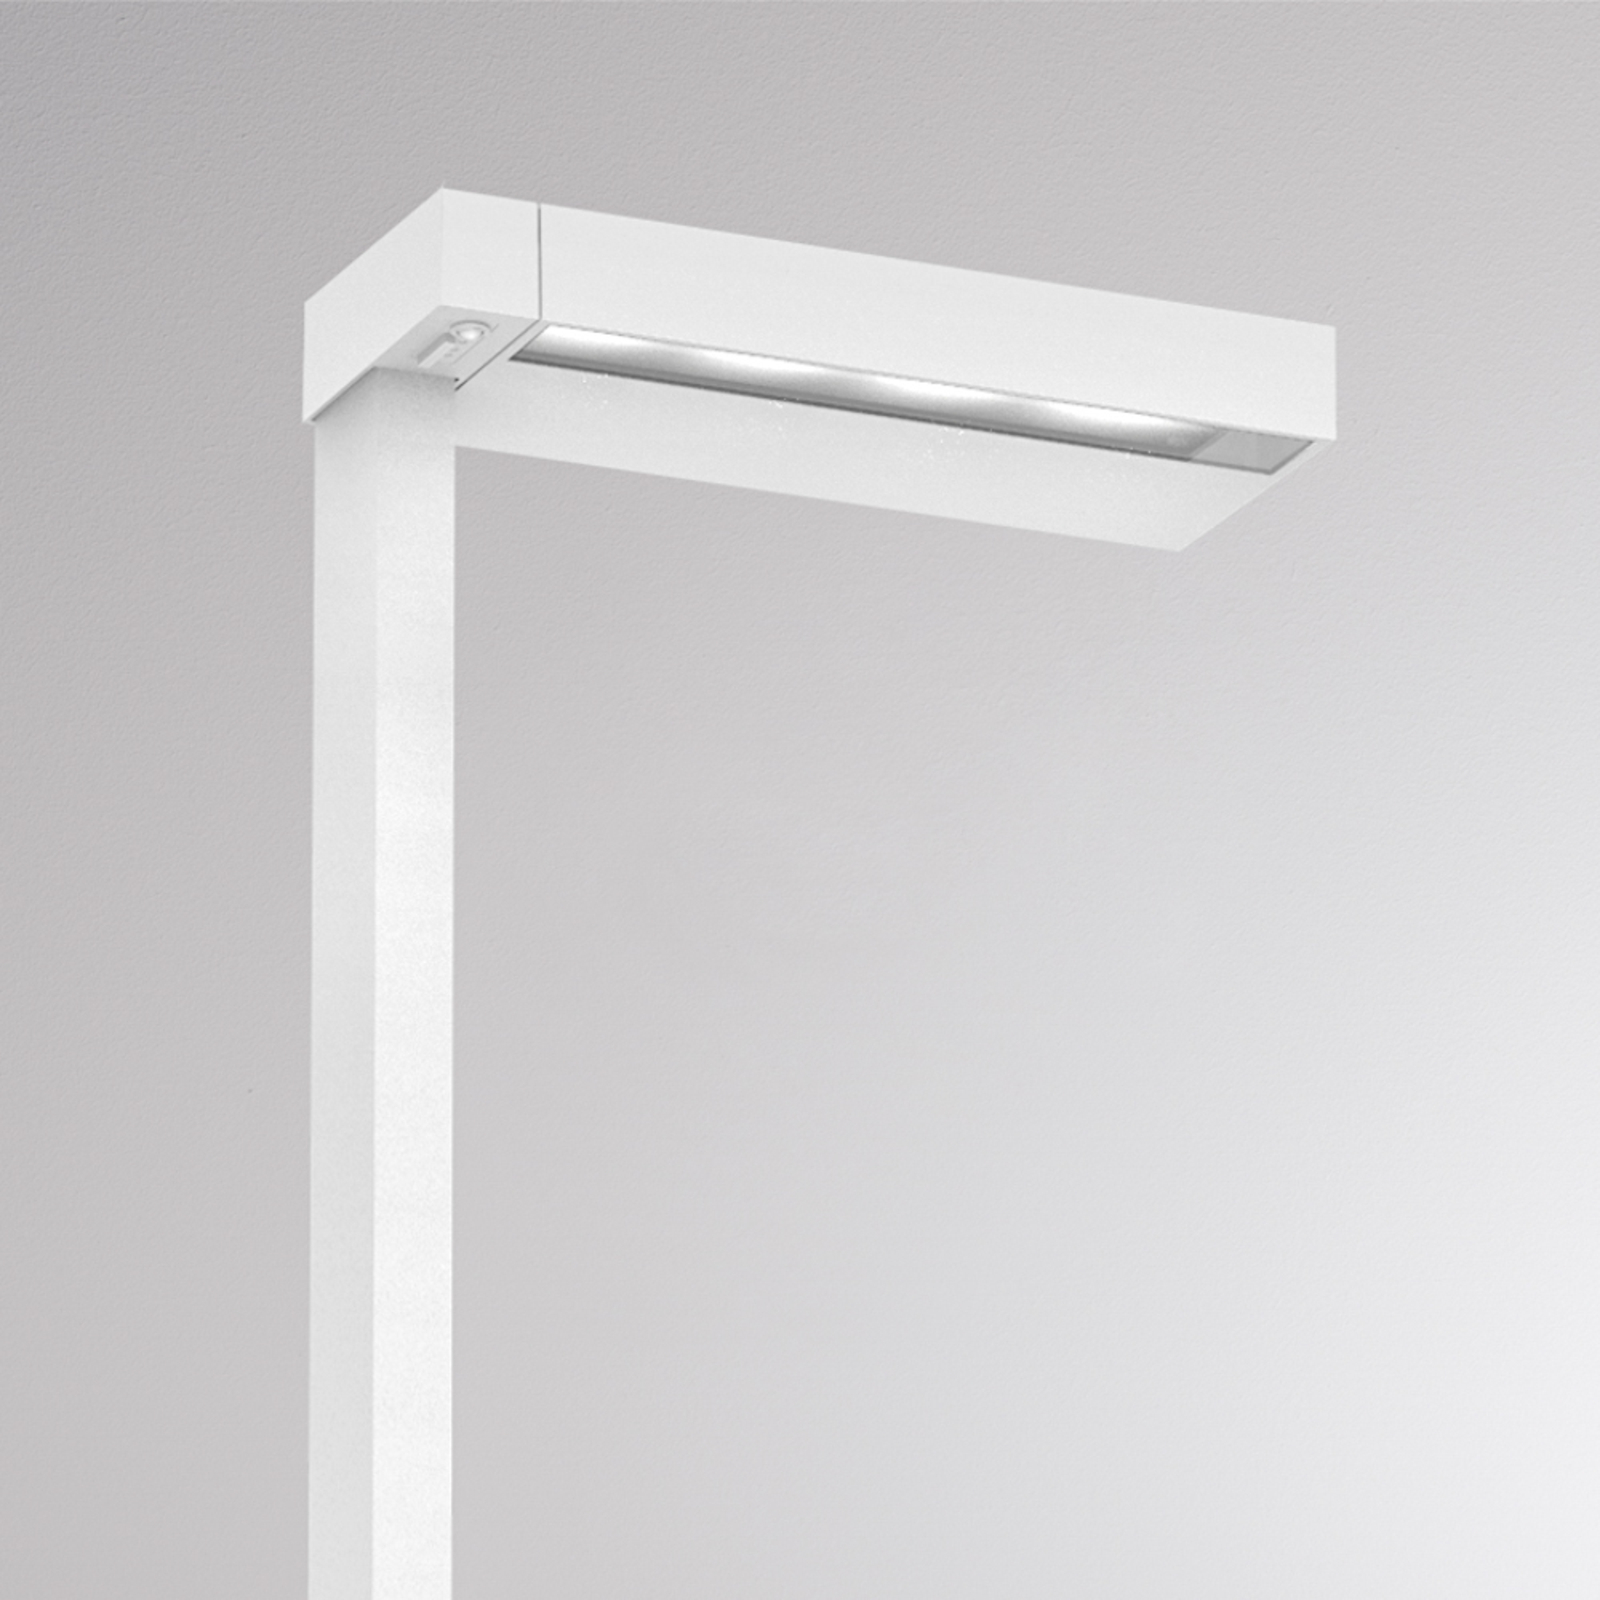 Molto Luce Concept Right F lampadaire dimmable